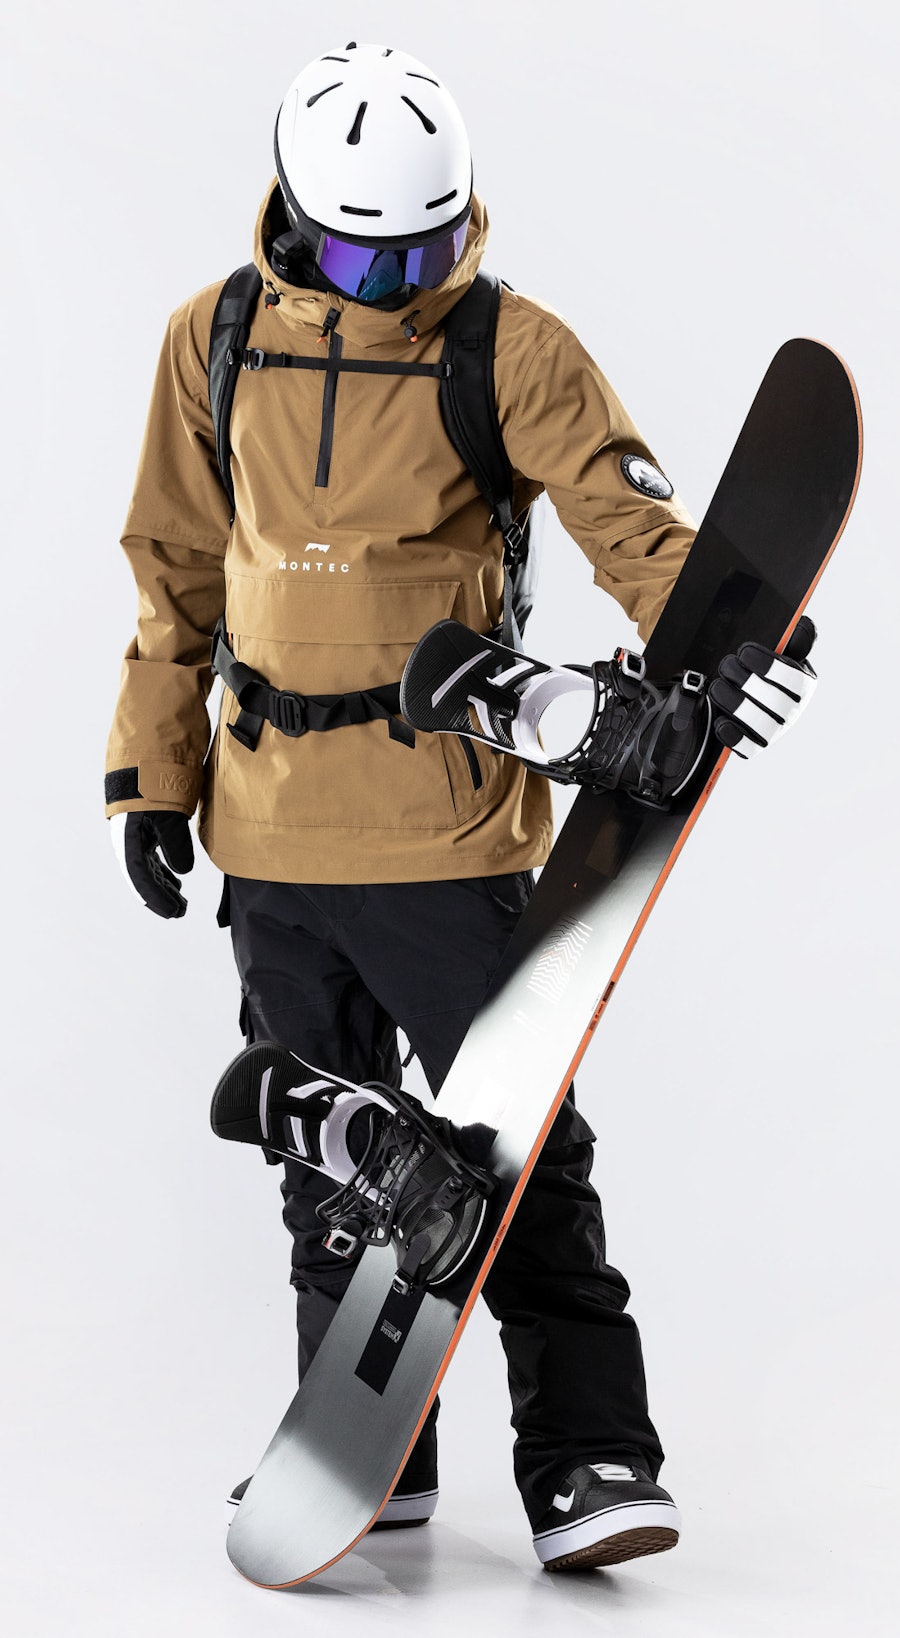 Montec Typhoon Gold Outfit Snowboard Multi